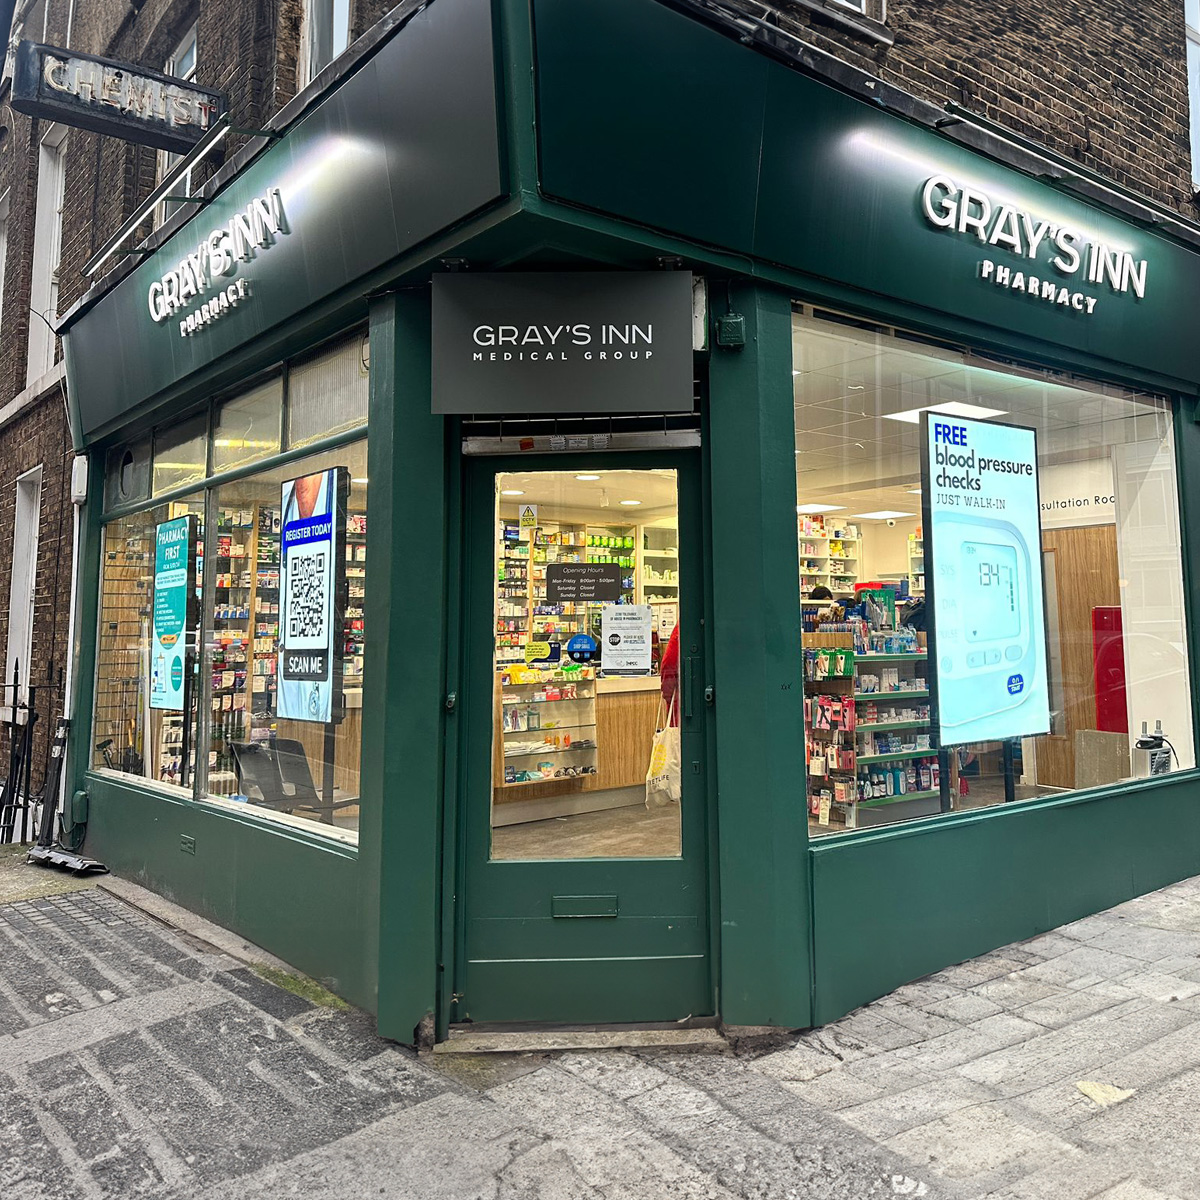 grays inn pharmacy with three digital window adverts promoting free blood pressure checks and registering to them with a qr code